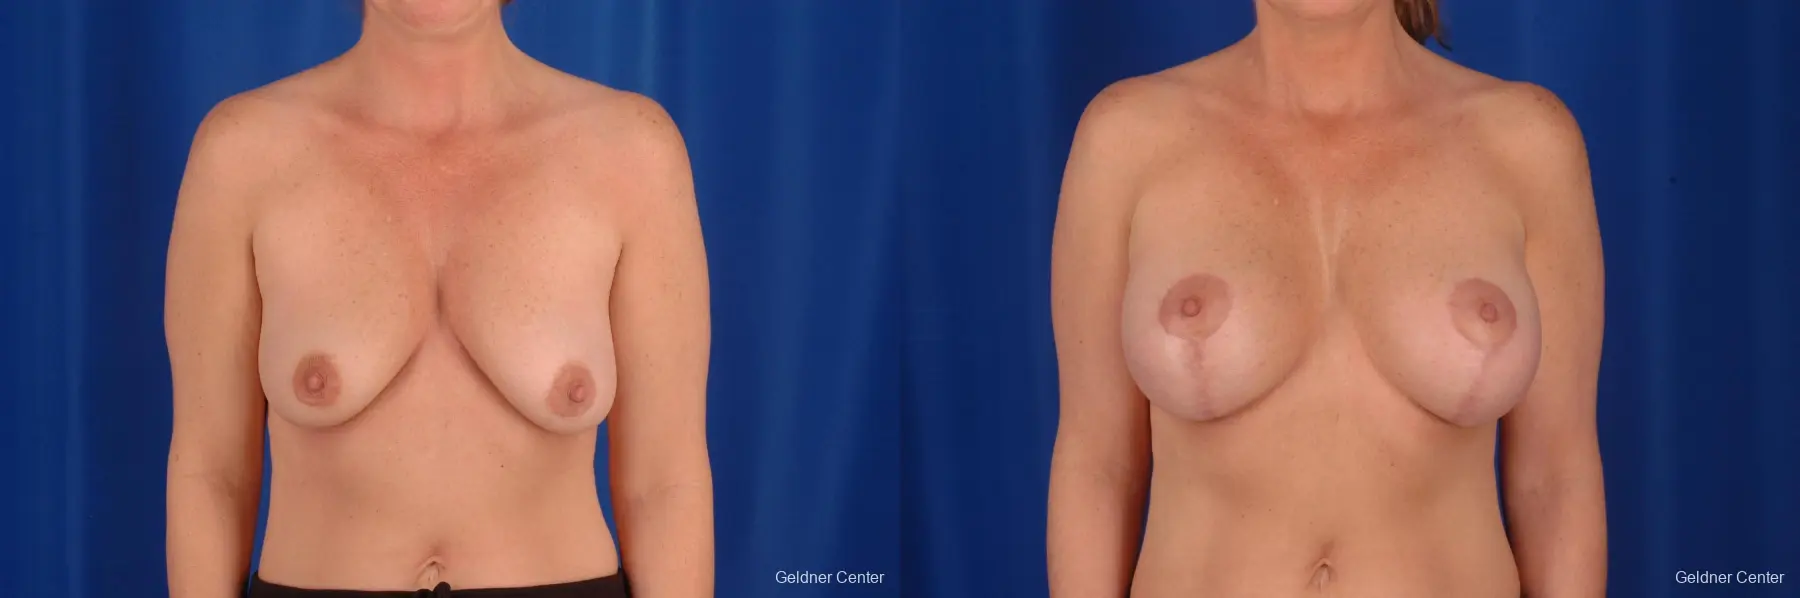 Breast Lift Lake Shore Dr, Chicago 2308 - Before and After 1